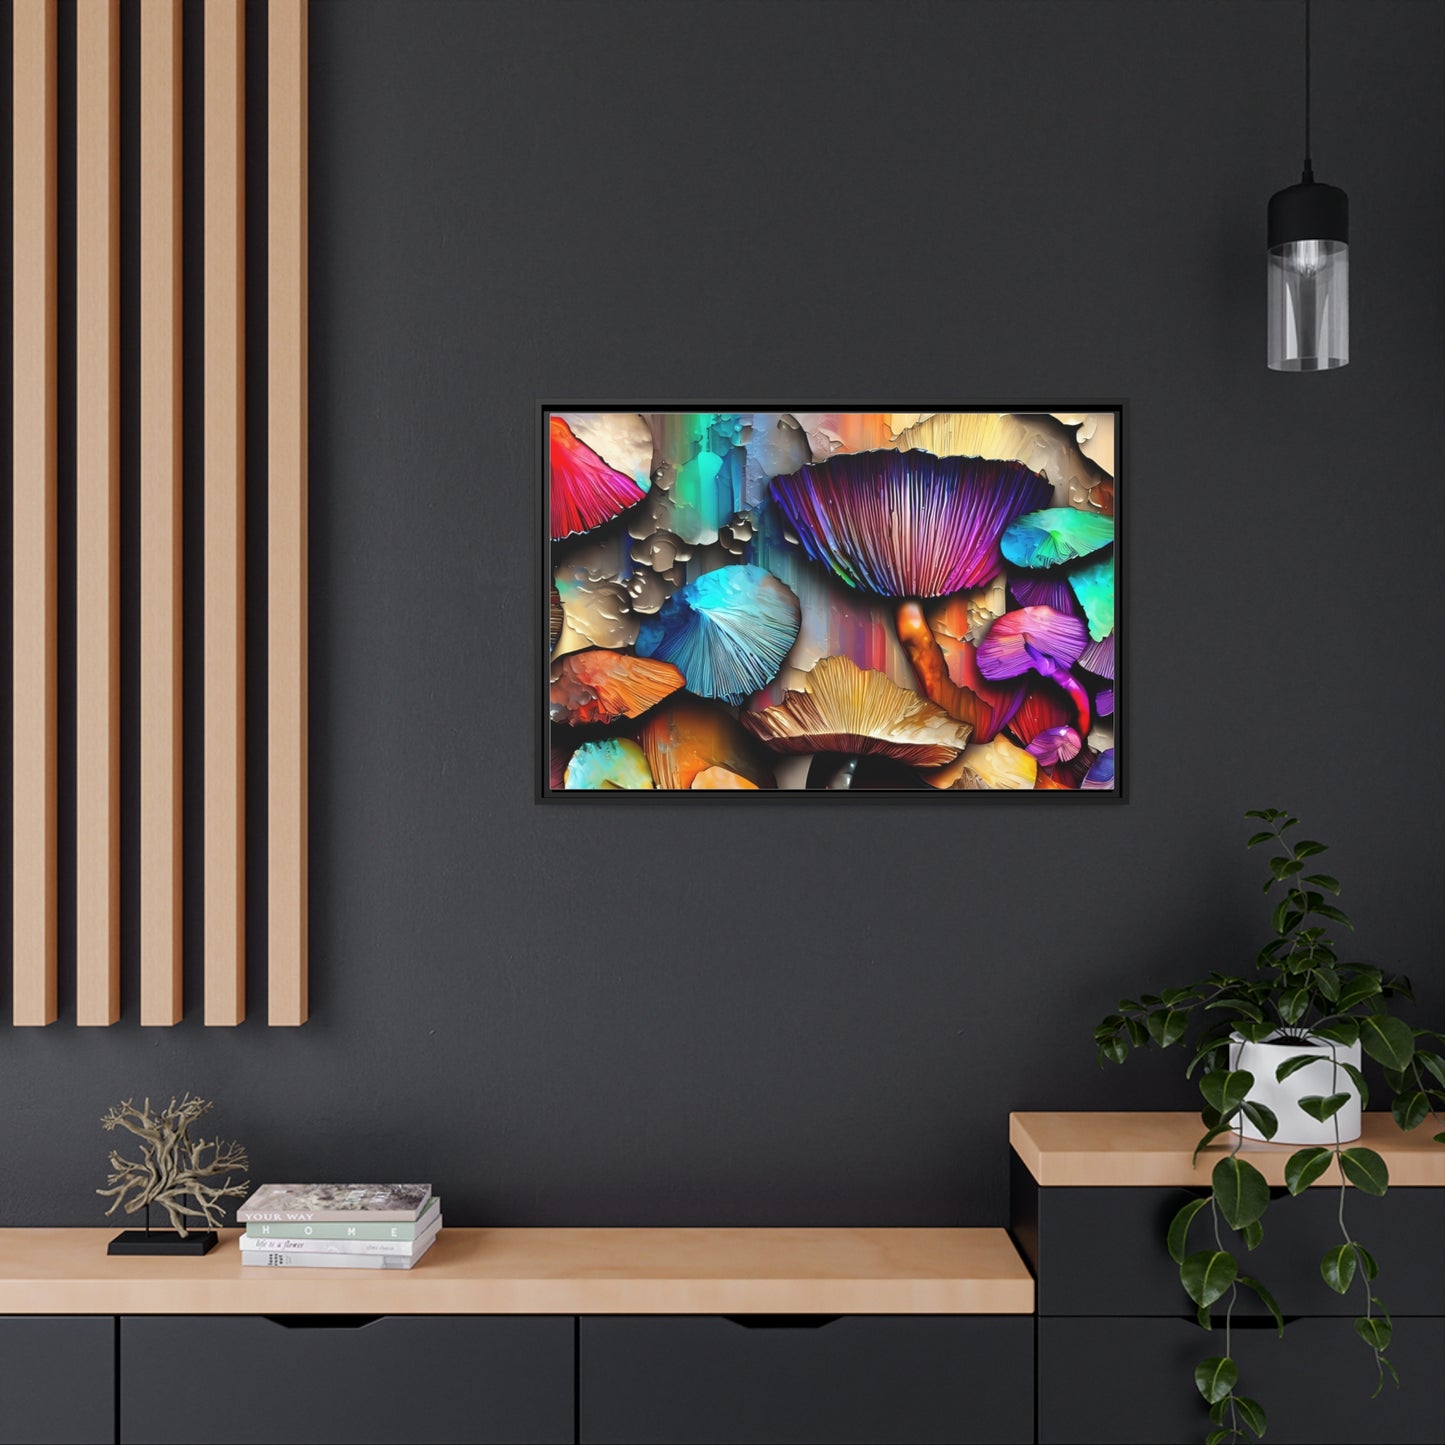 Home Decor - Matte Canvas Wall Art, Black Frame - Wildshrooms - Fathers Day Gift Item Special